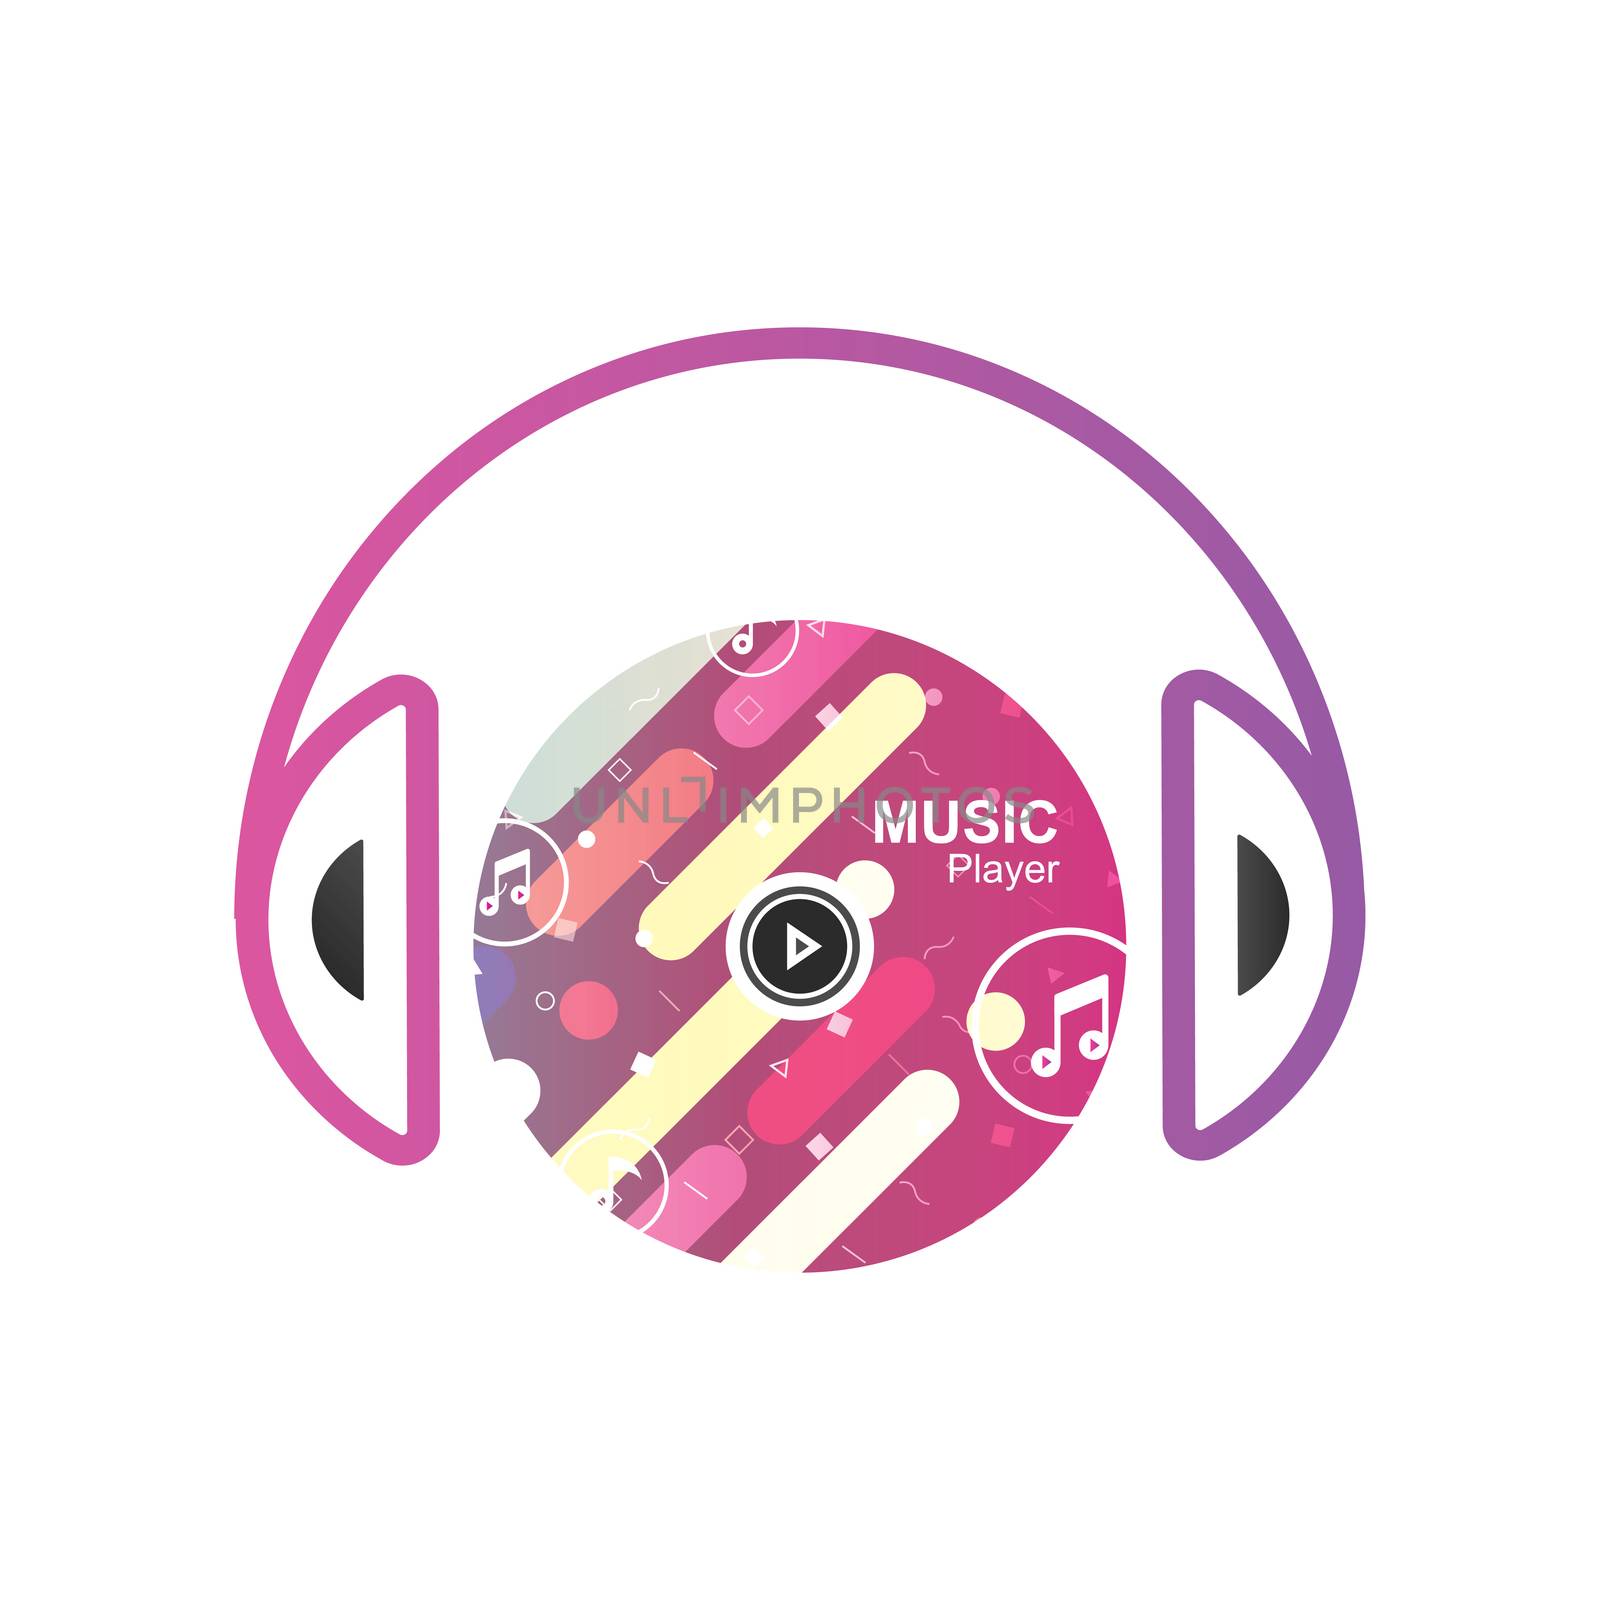 CD Music player concept